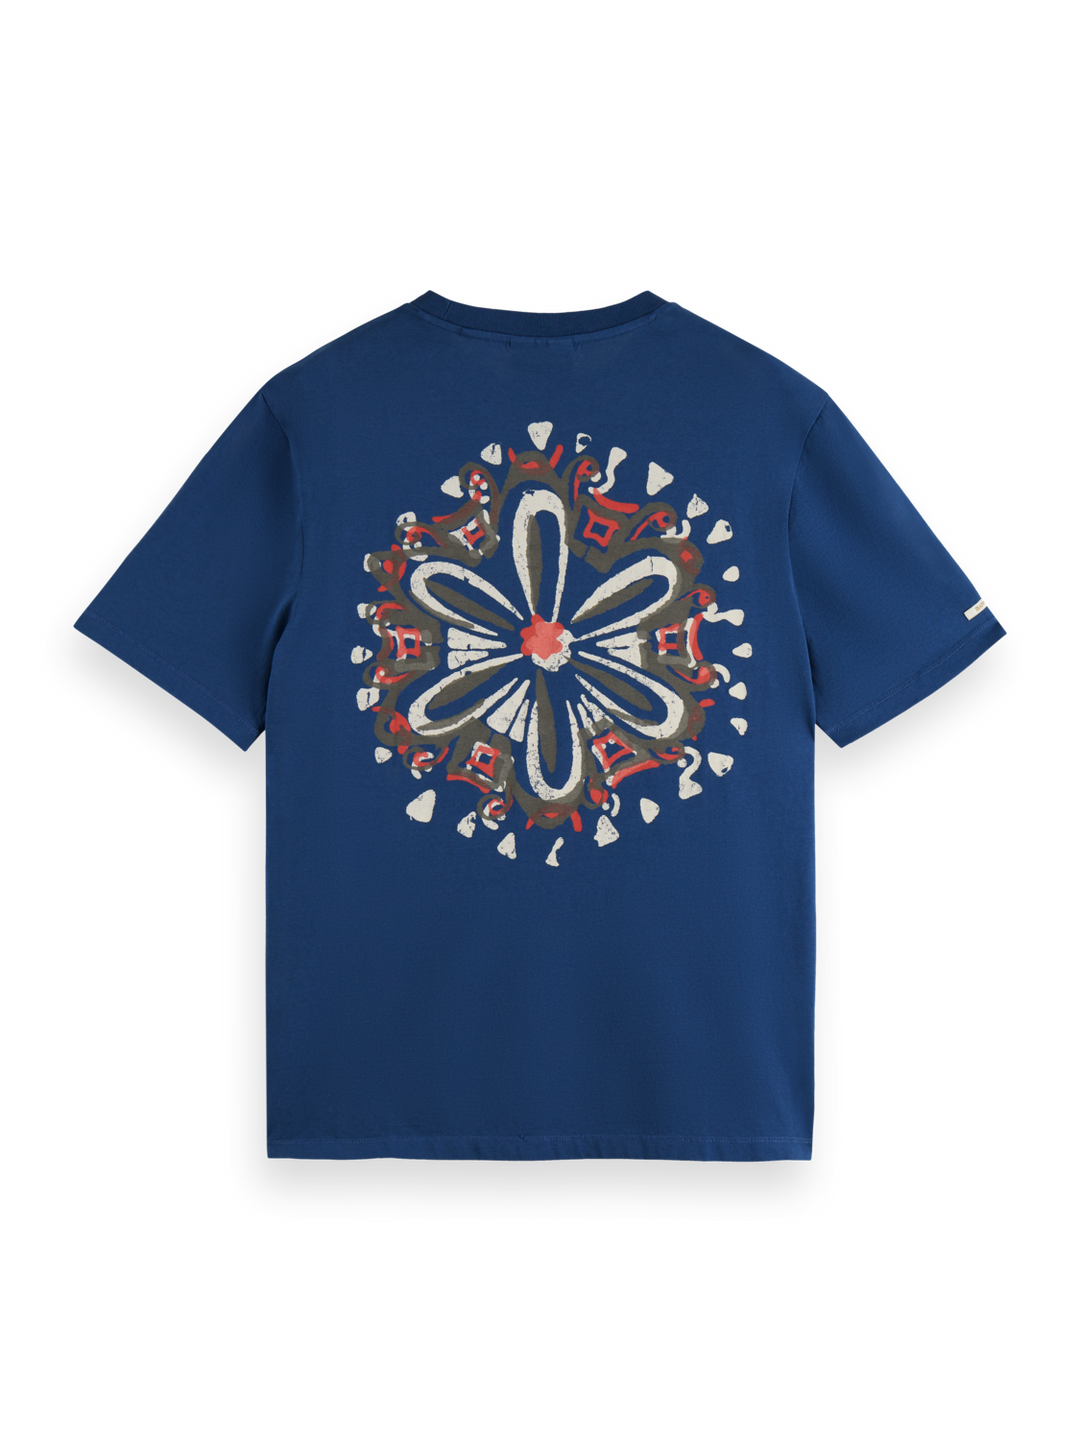 Festival Artwork Tee Shirt in Storm Blue | Buster McGee